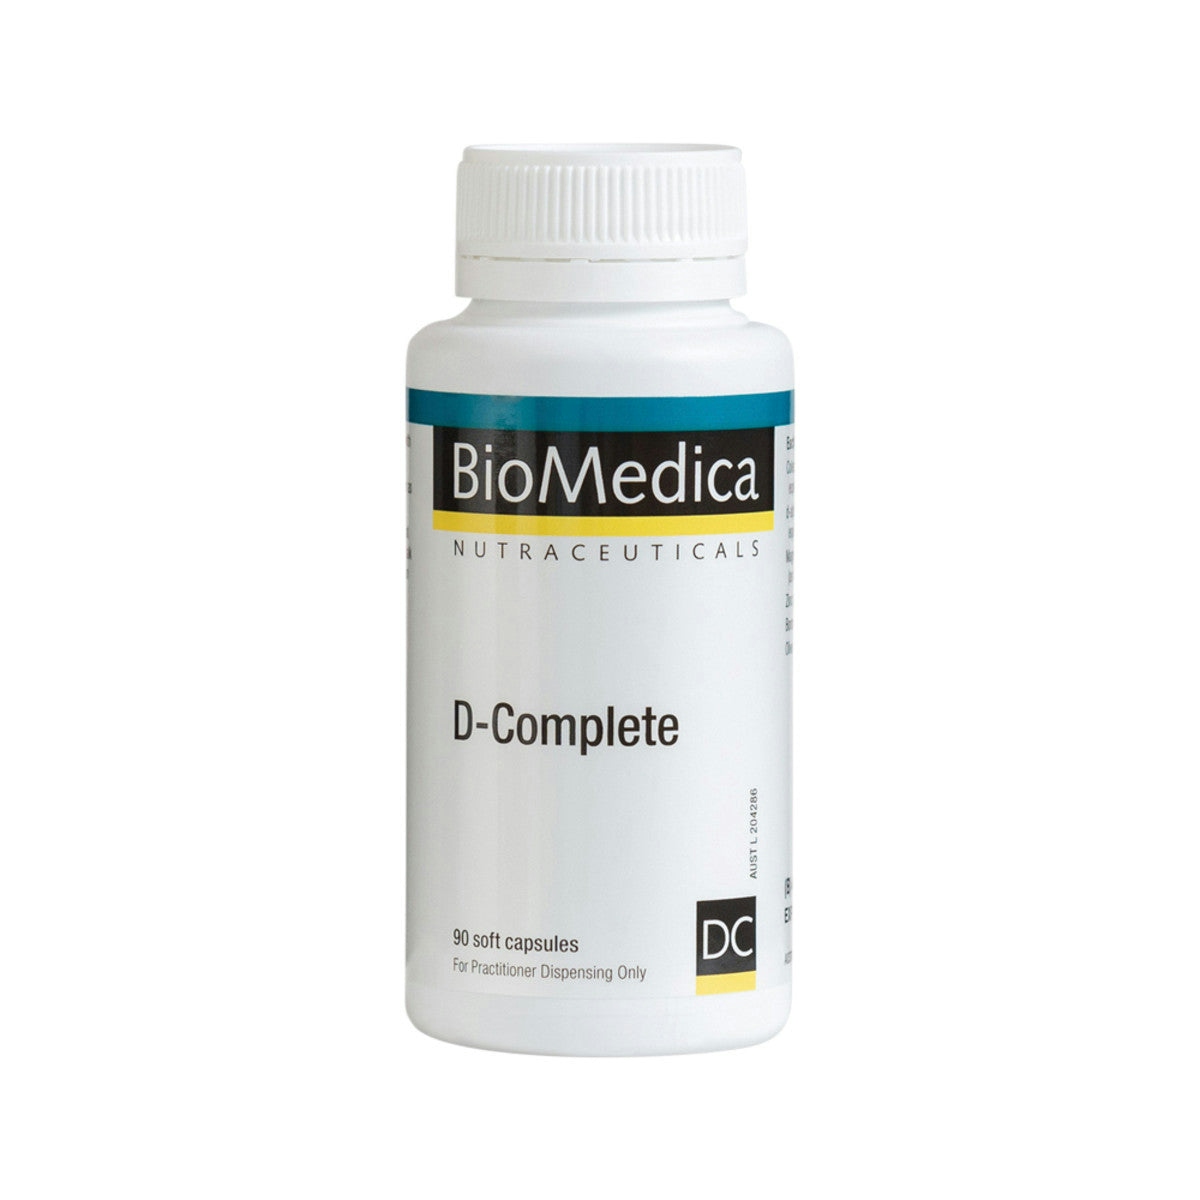 image of BioMedica Nutraceuticals D-Complete 90c on white background